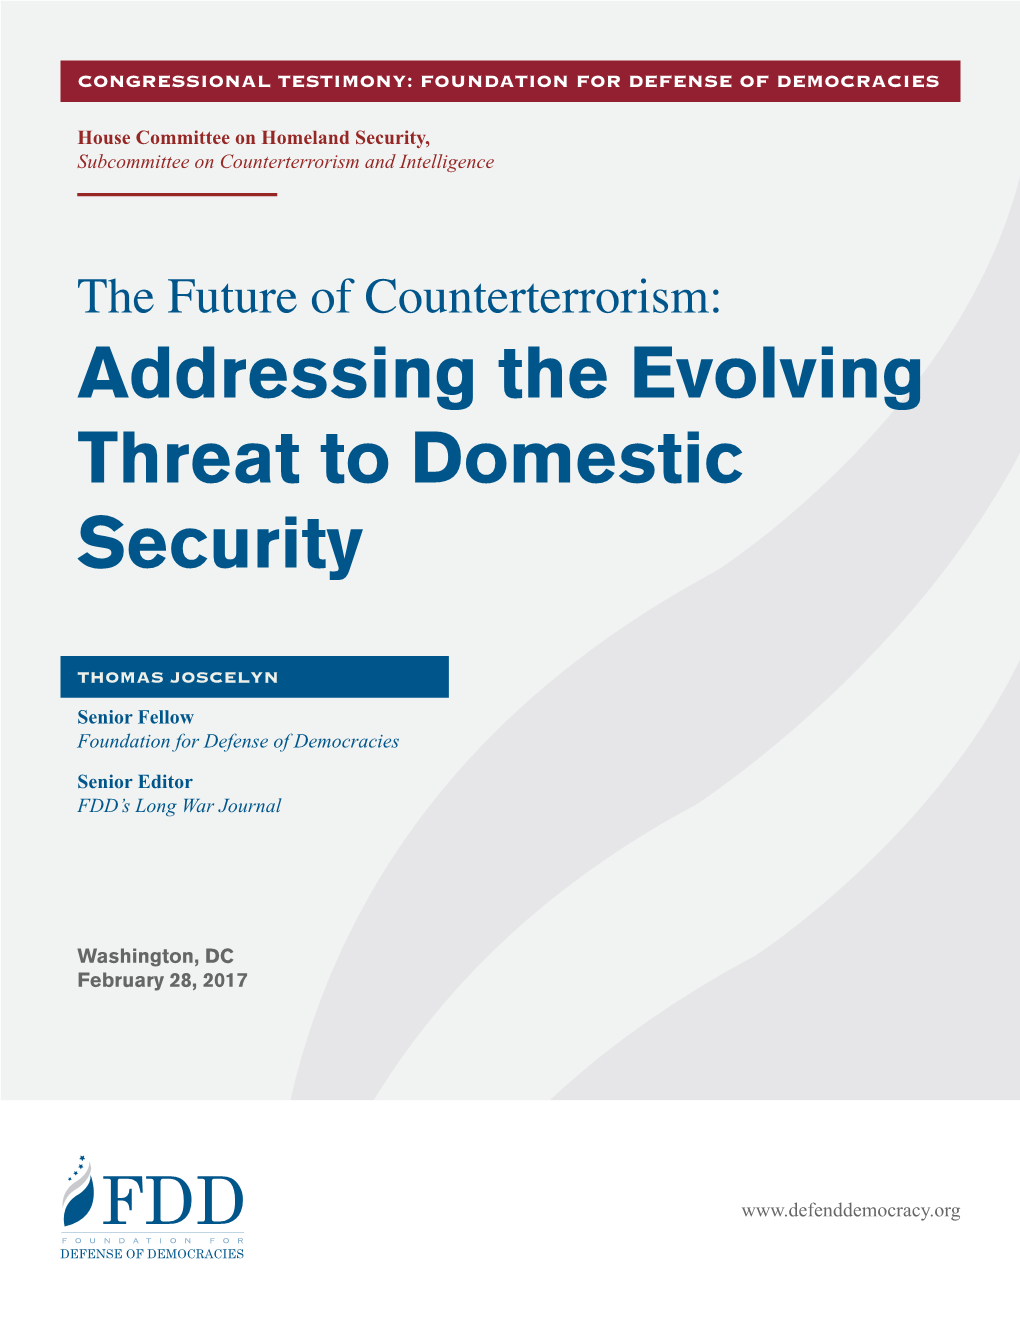 Addressing the Evolving Threat to Domestic Security